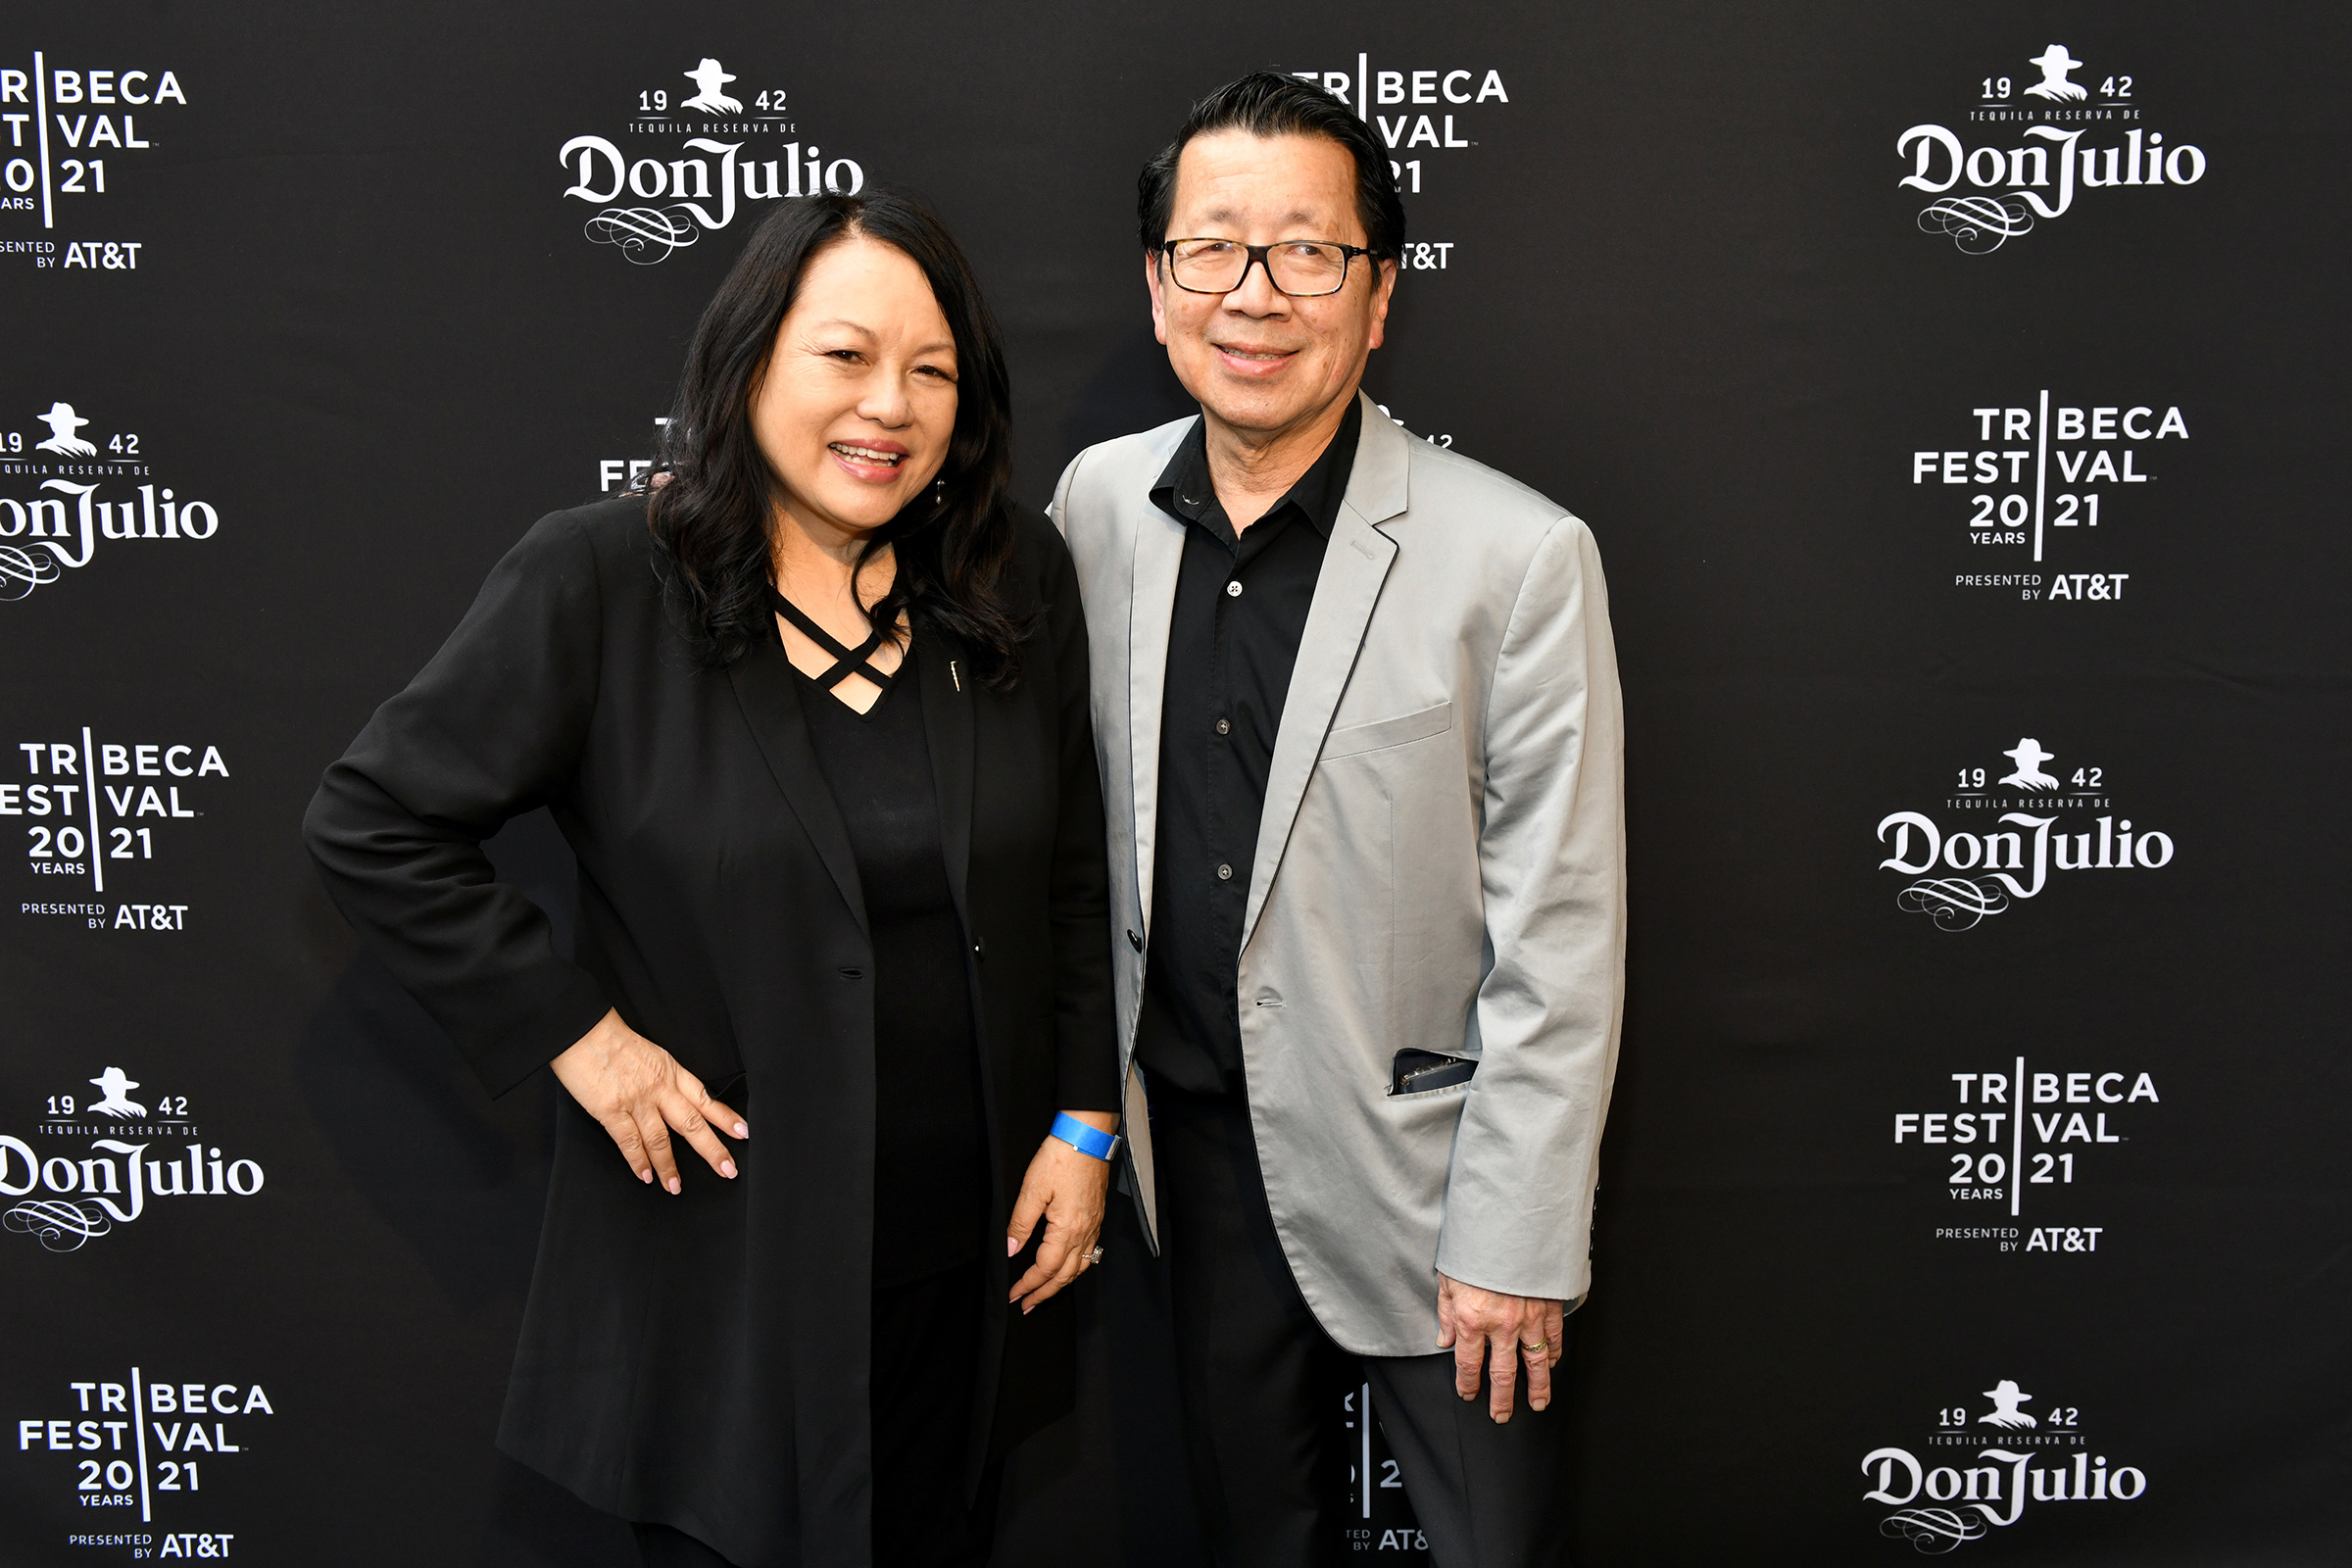 Suzanne Kai and Ben Fong-Torres at the Tribeca Film Festival